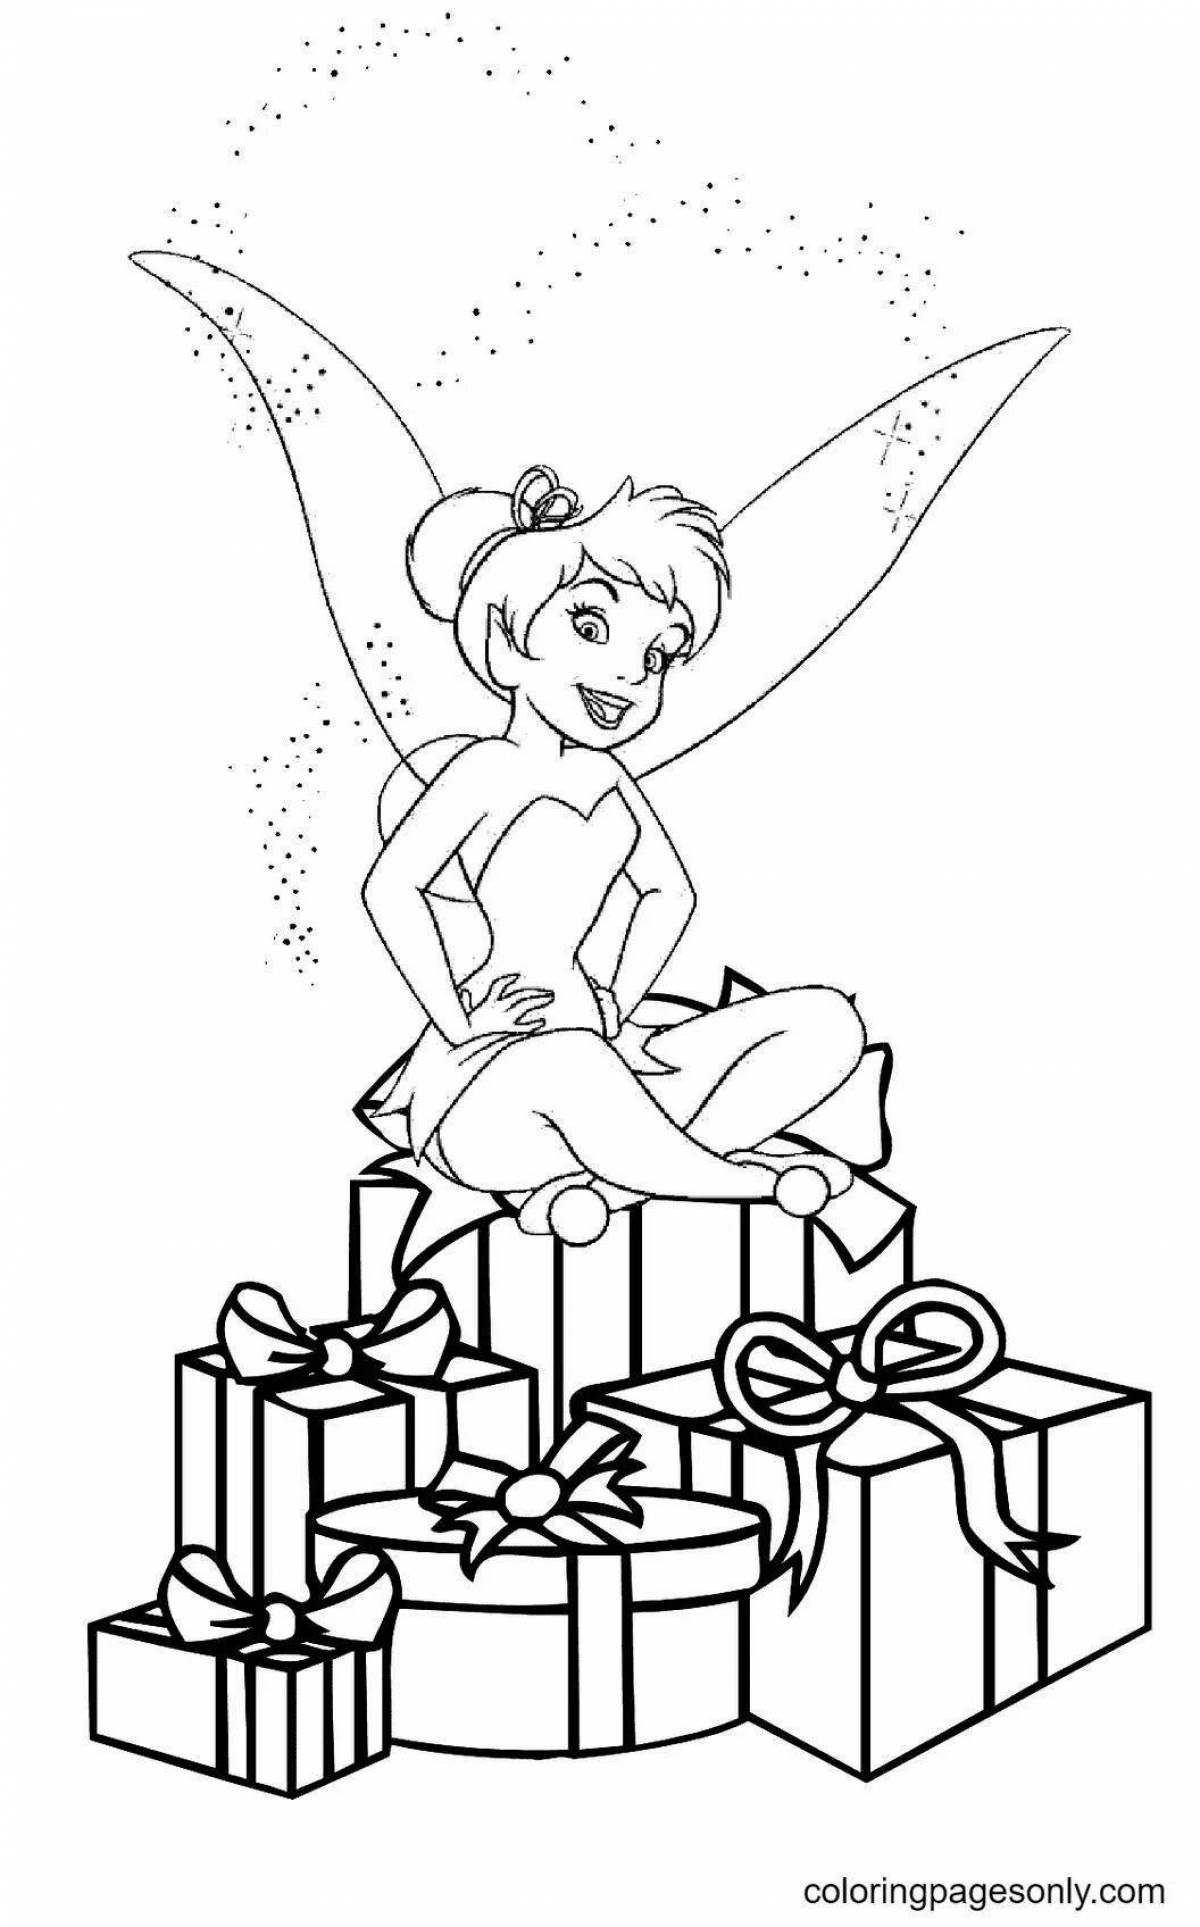 Large coloring book for girls as a gift